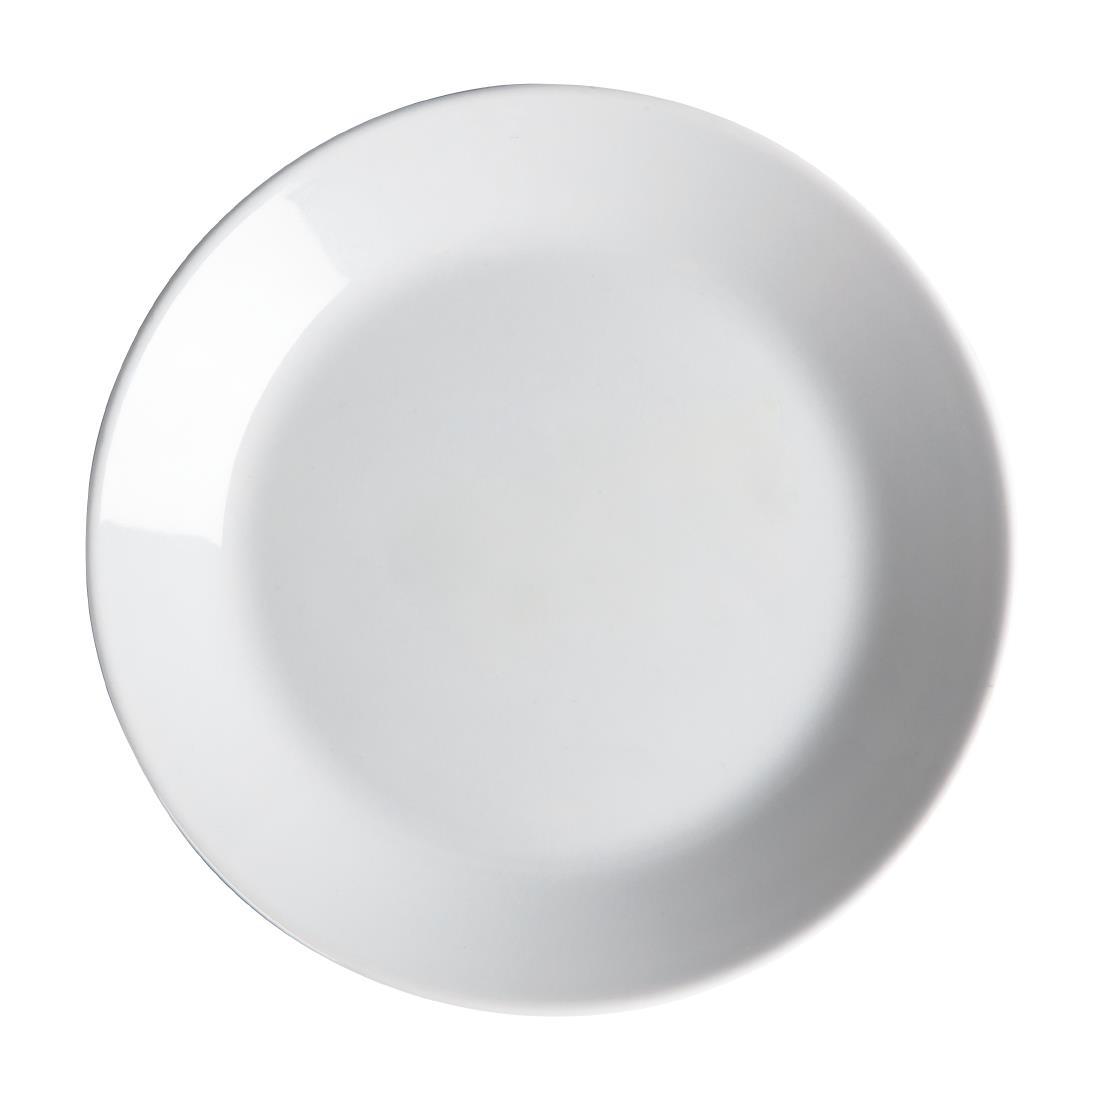 Royal Porcelain Classic White Coupe Plates 150mm (Pack of 12) - CG001  - 3